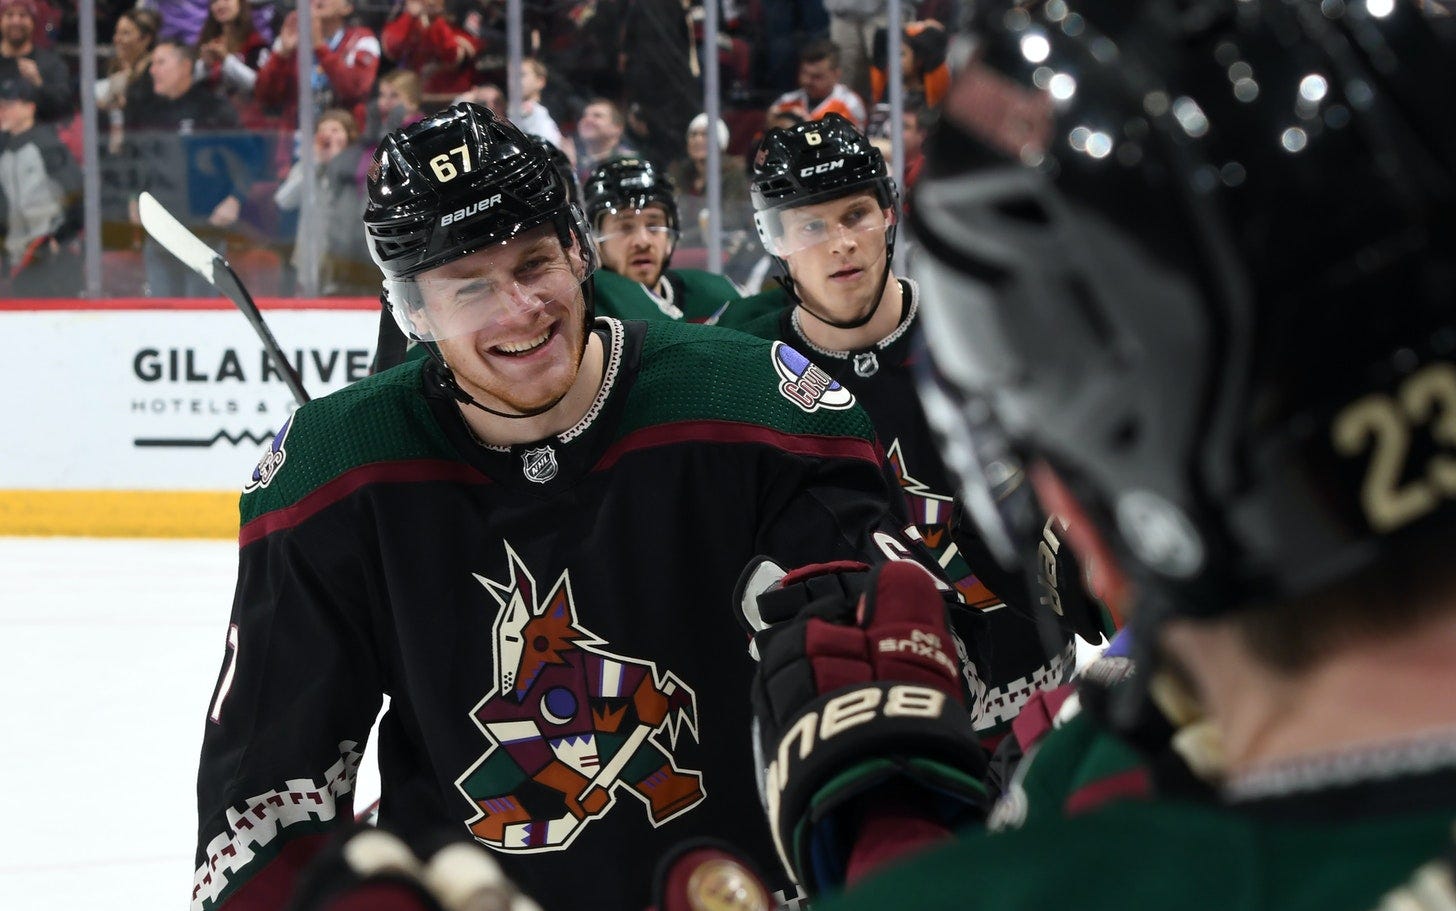 The Arizona Coyotes look to start fresh with a talented young core